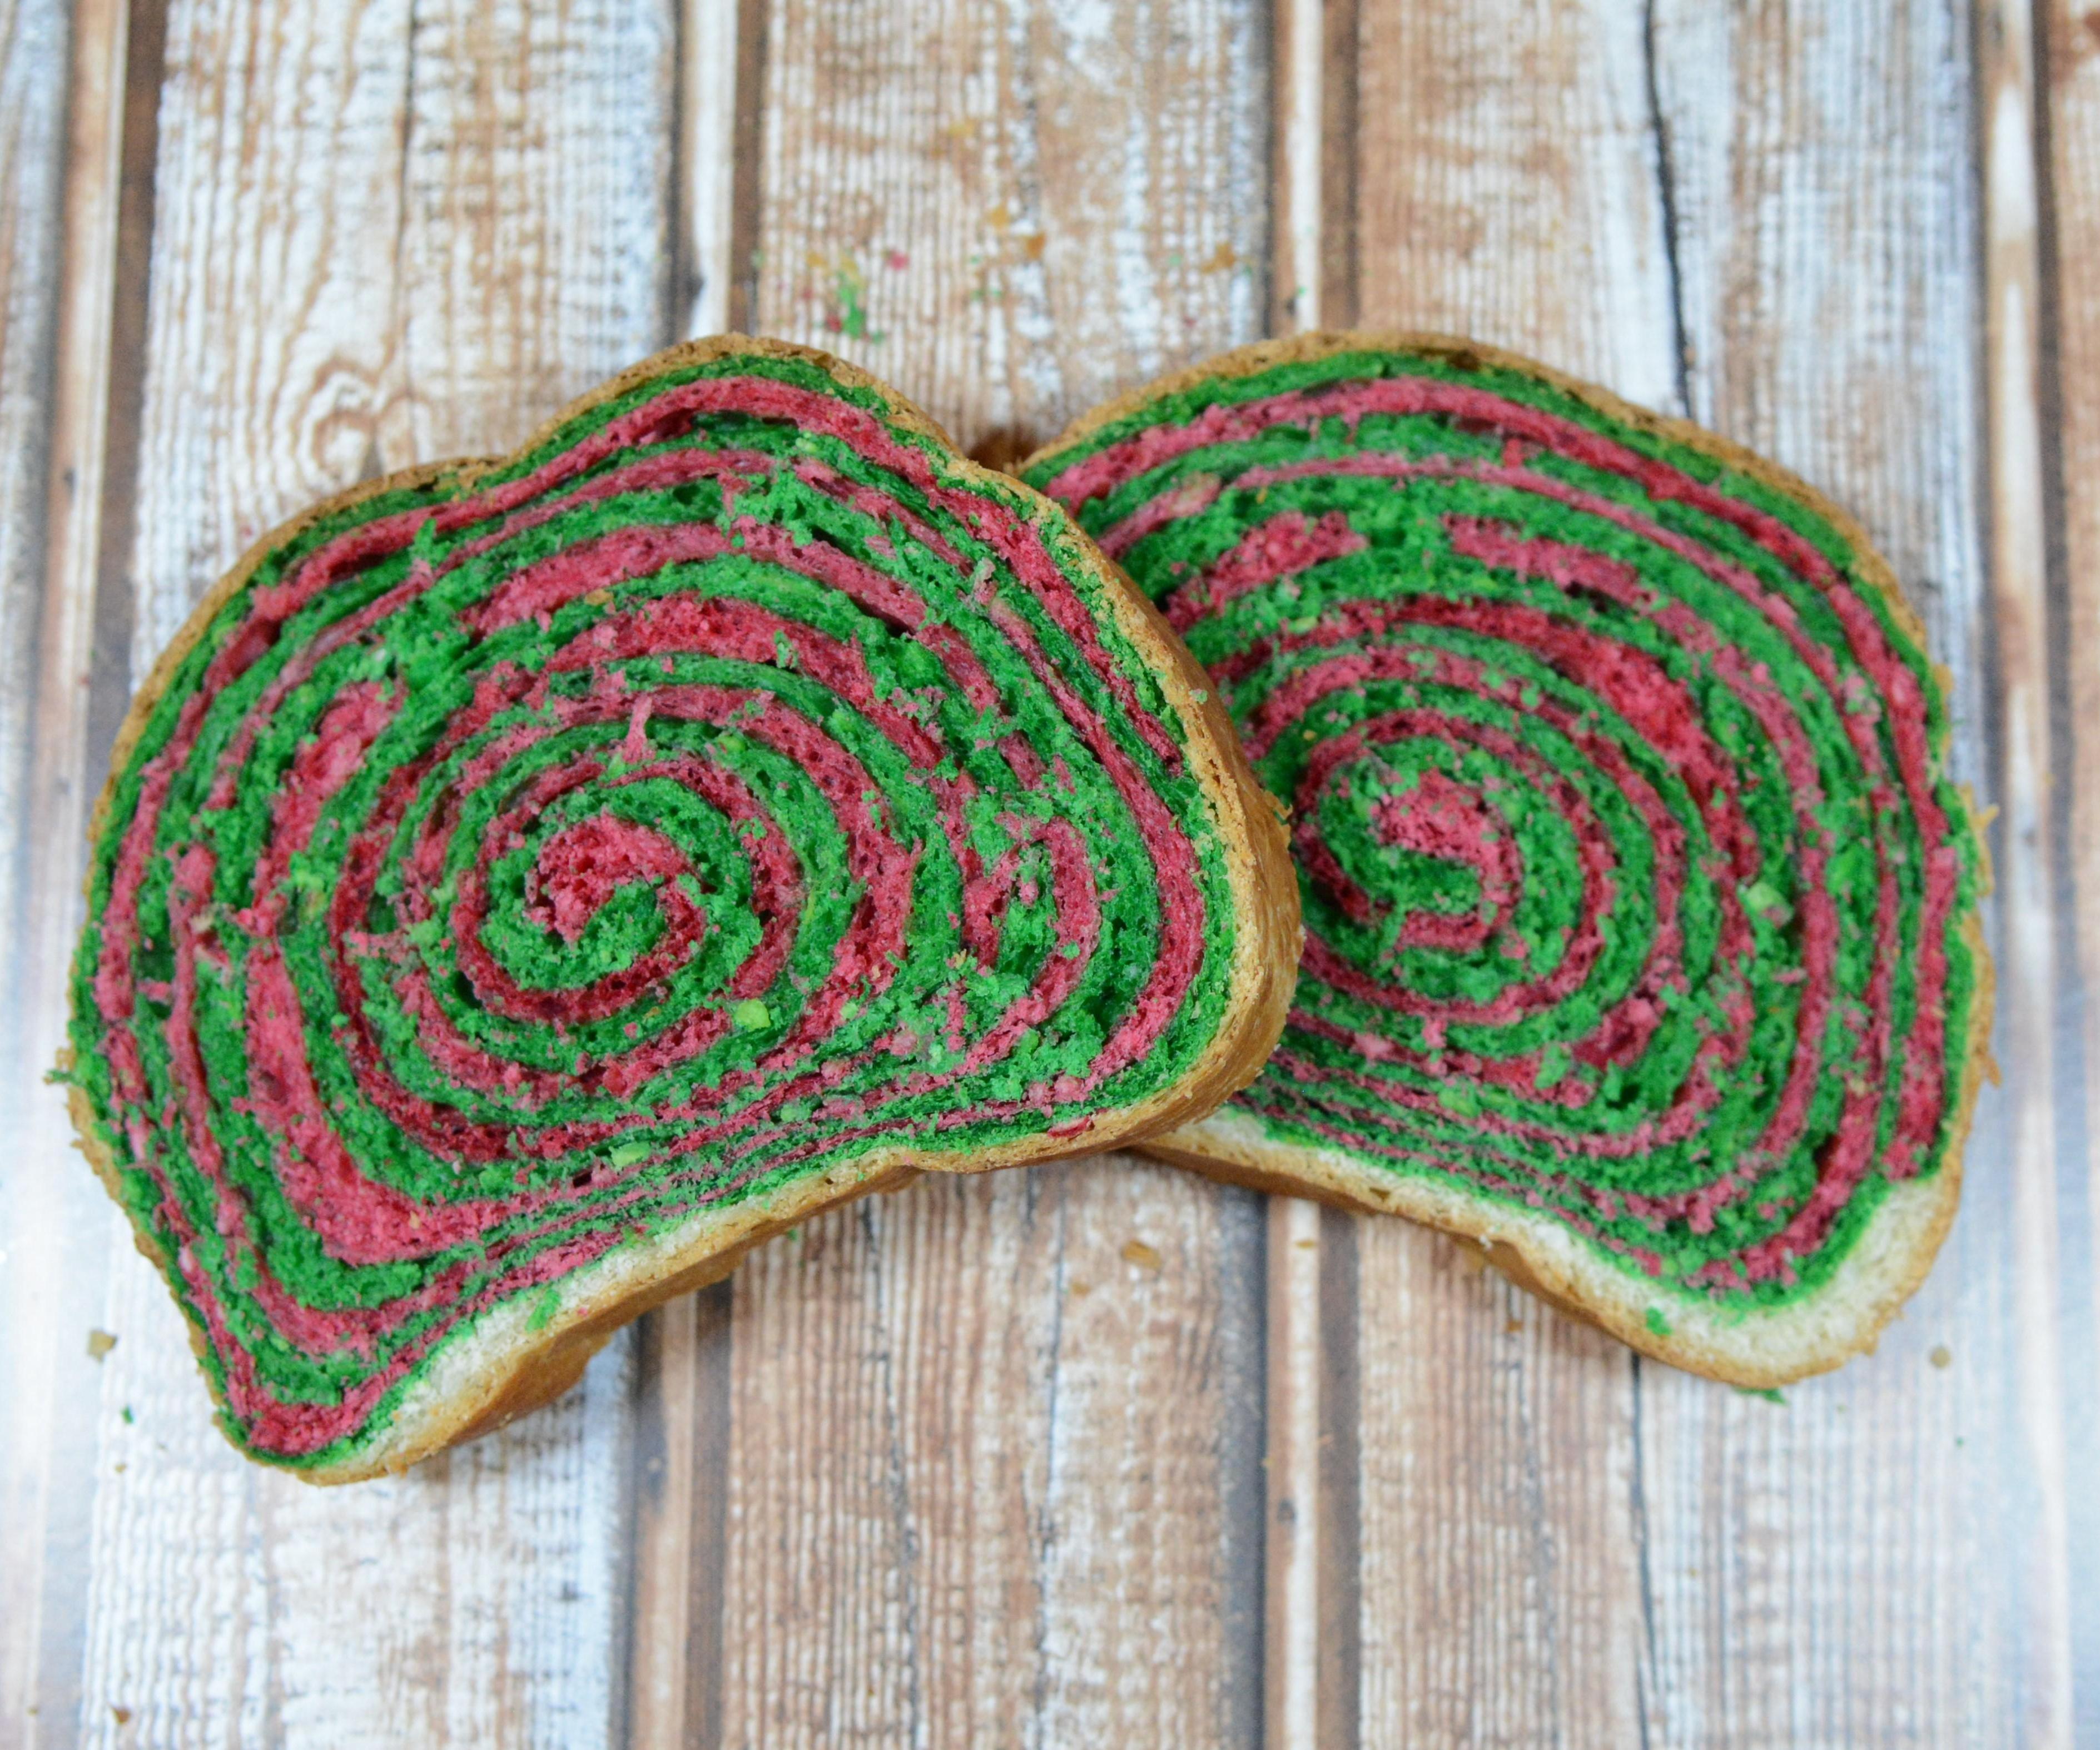 Coconut Bread Loaf With Psychedelic Spiral 